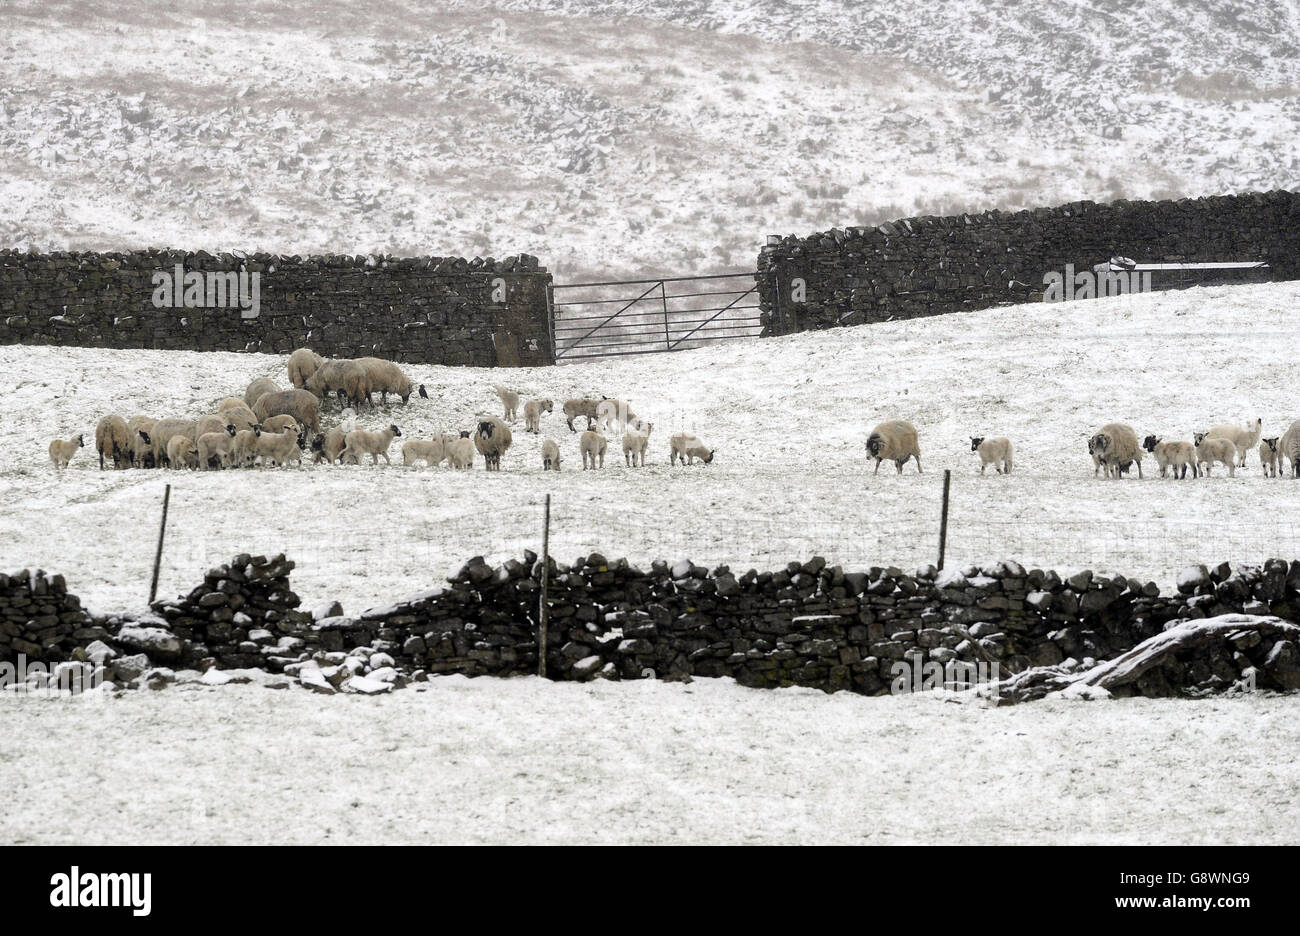 Winter returns to the Yorkshire Dales as the May Bank Holiday gets off to a cold start as this group of lambs look for shelter in fields near Hawes. Stock Photo